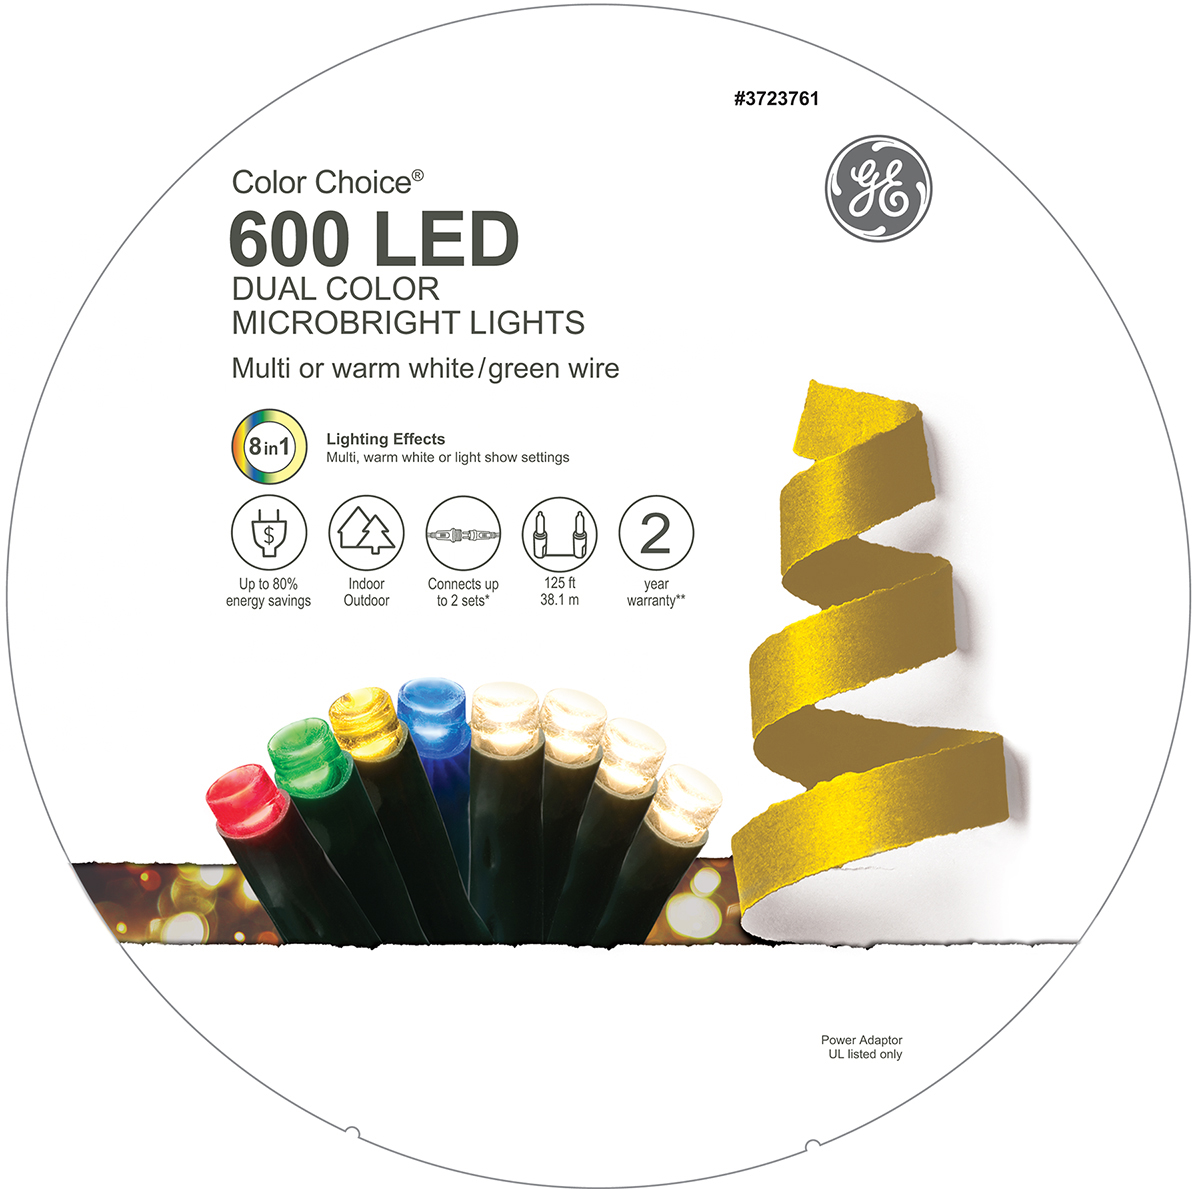 93961 - GE Color Choice® LED MicroBright Lights, 600ct, Multi/Warm